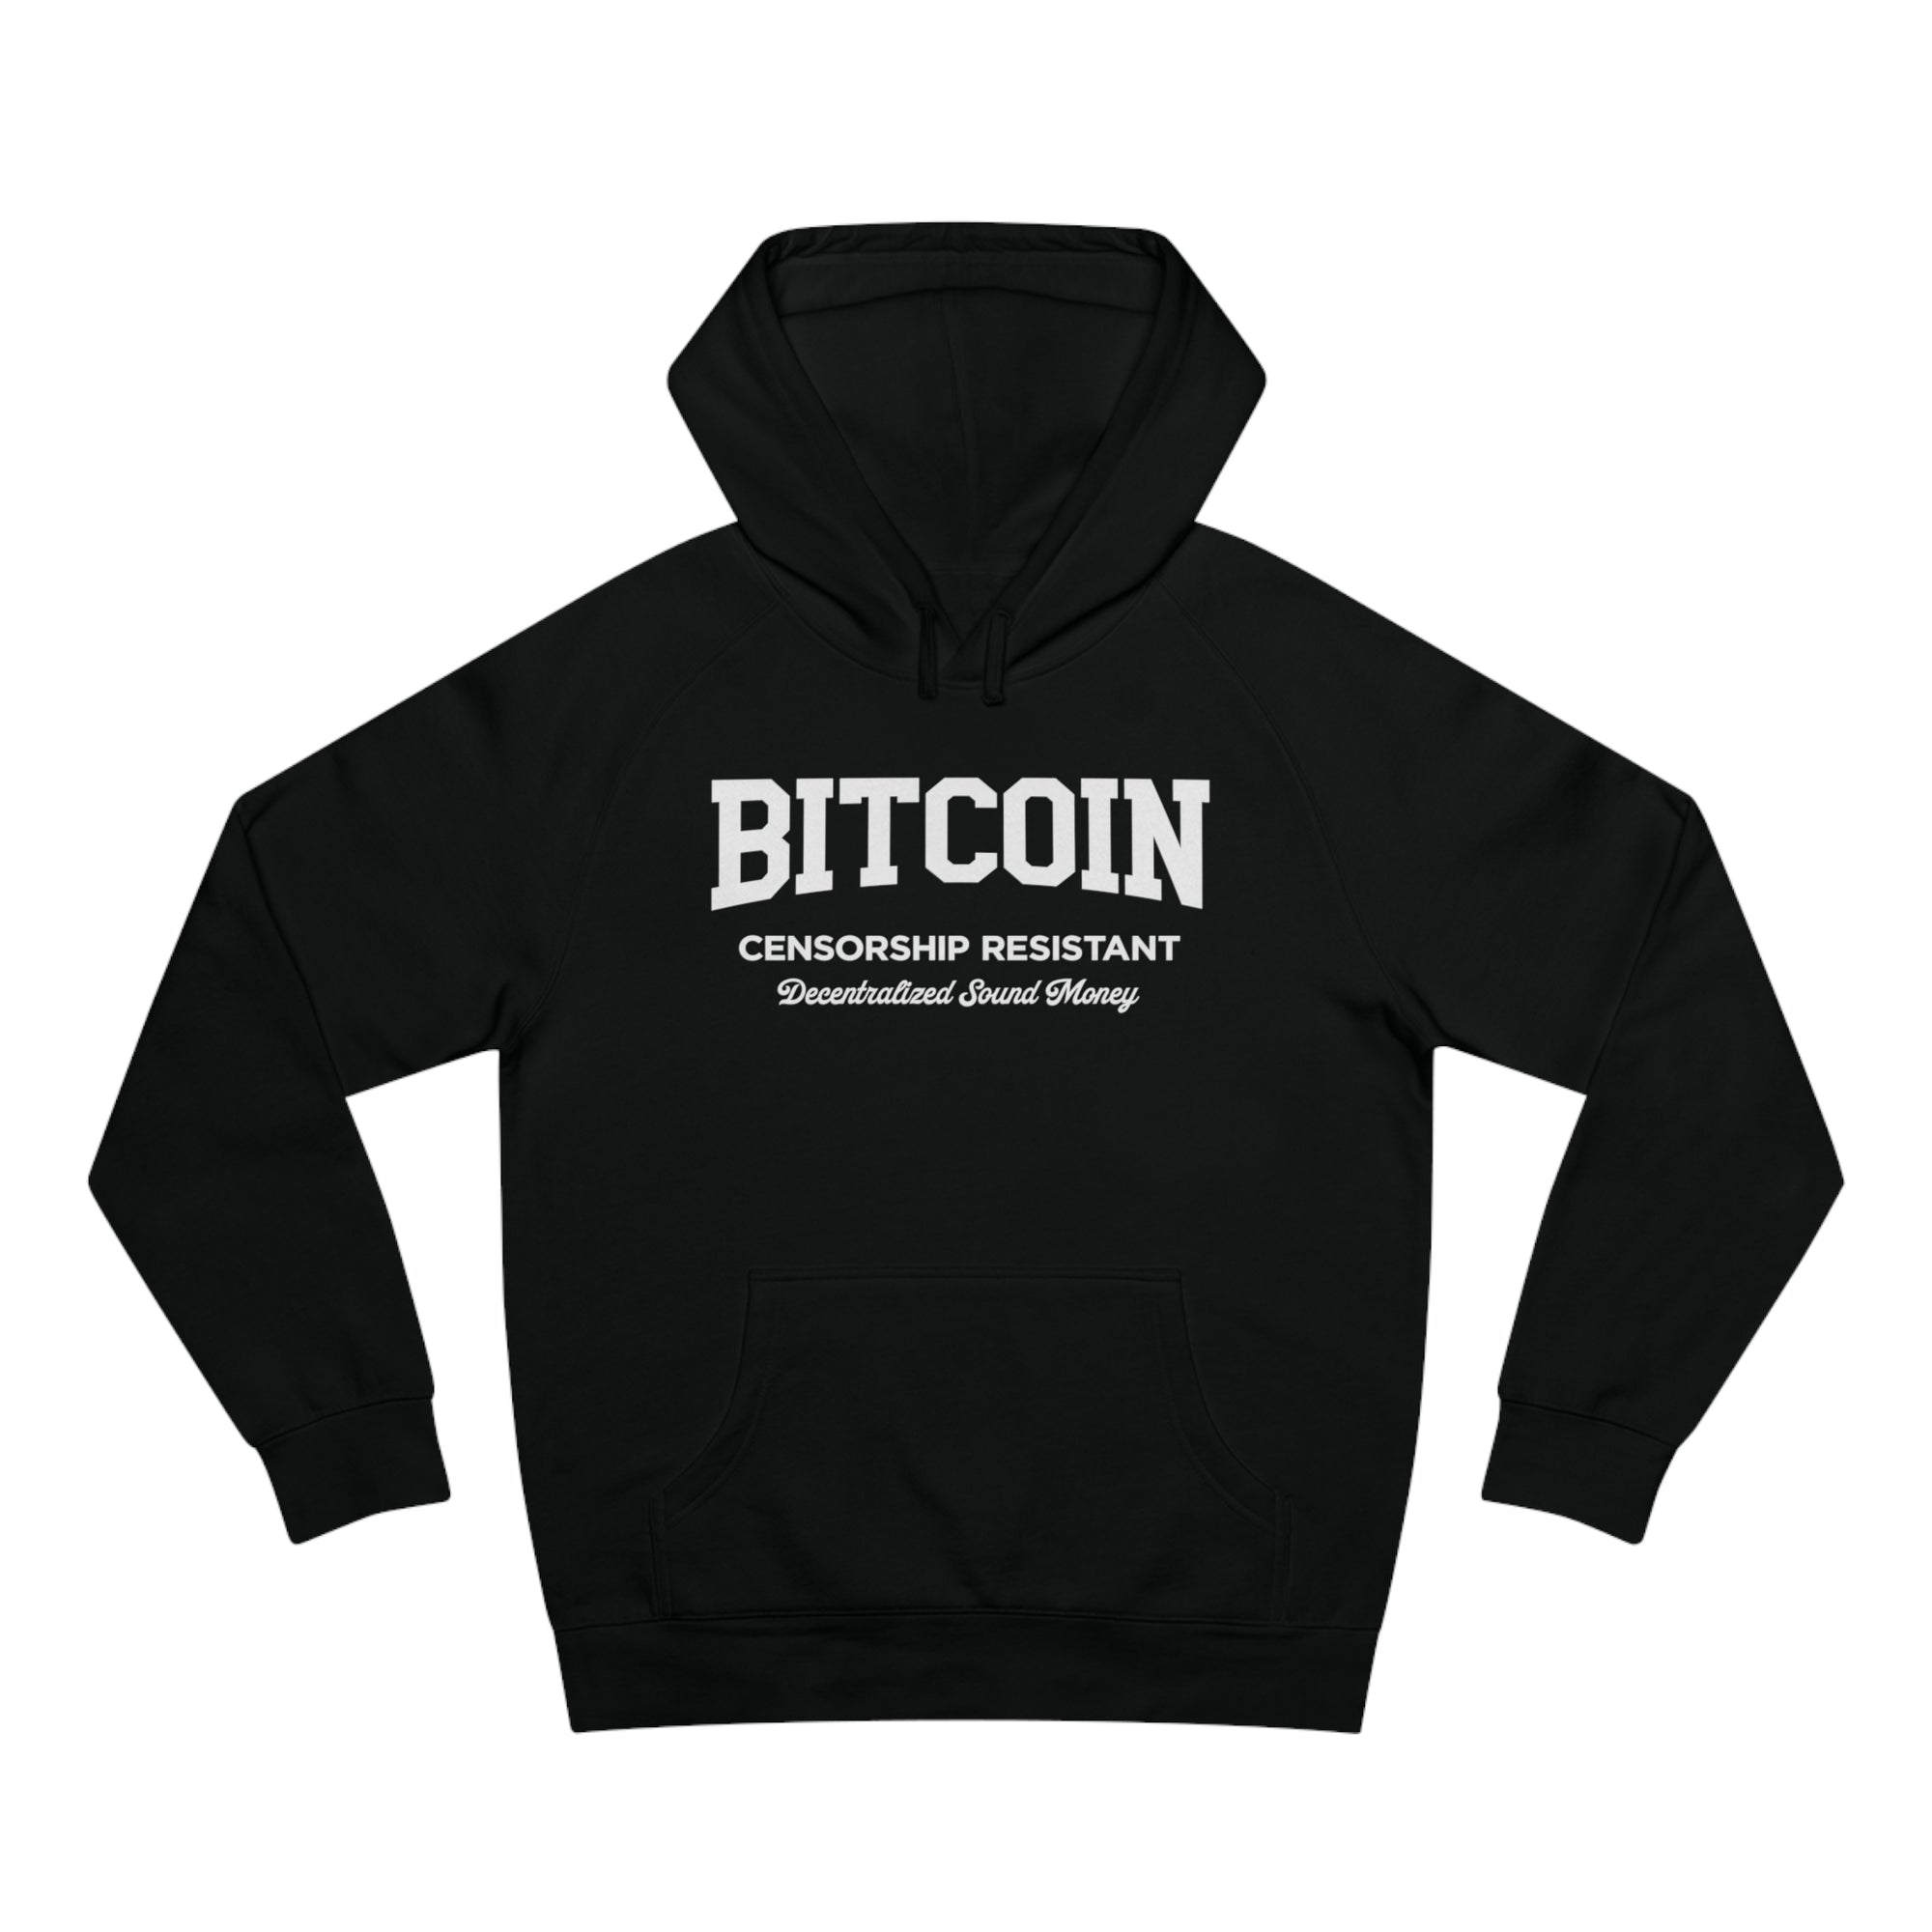 Bitcoin Hoodie - Bitcoin Censorship Resistant Hoodie. Front View.